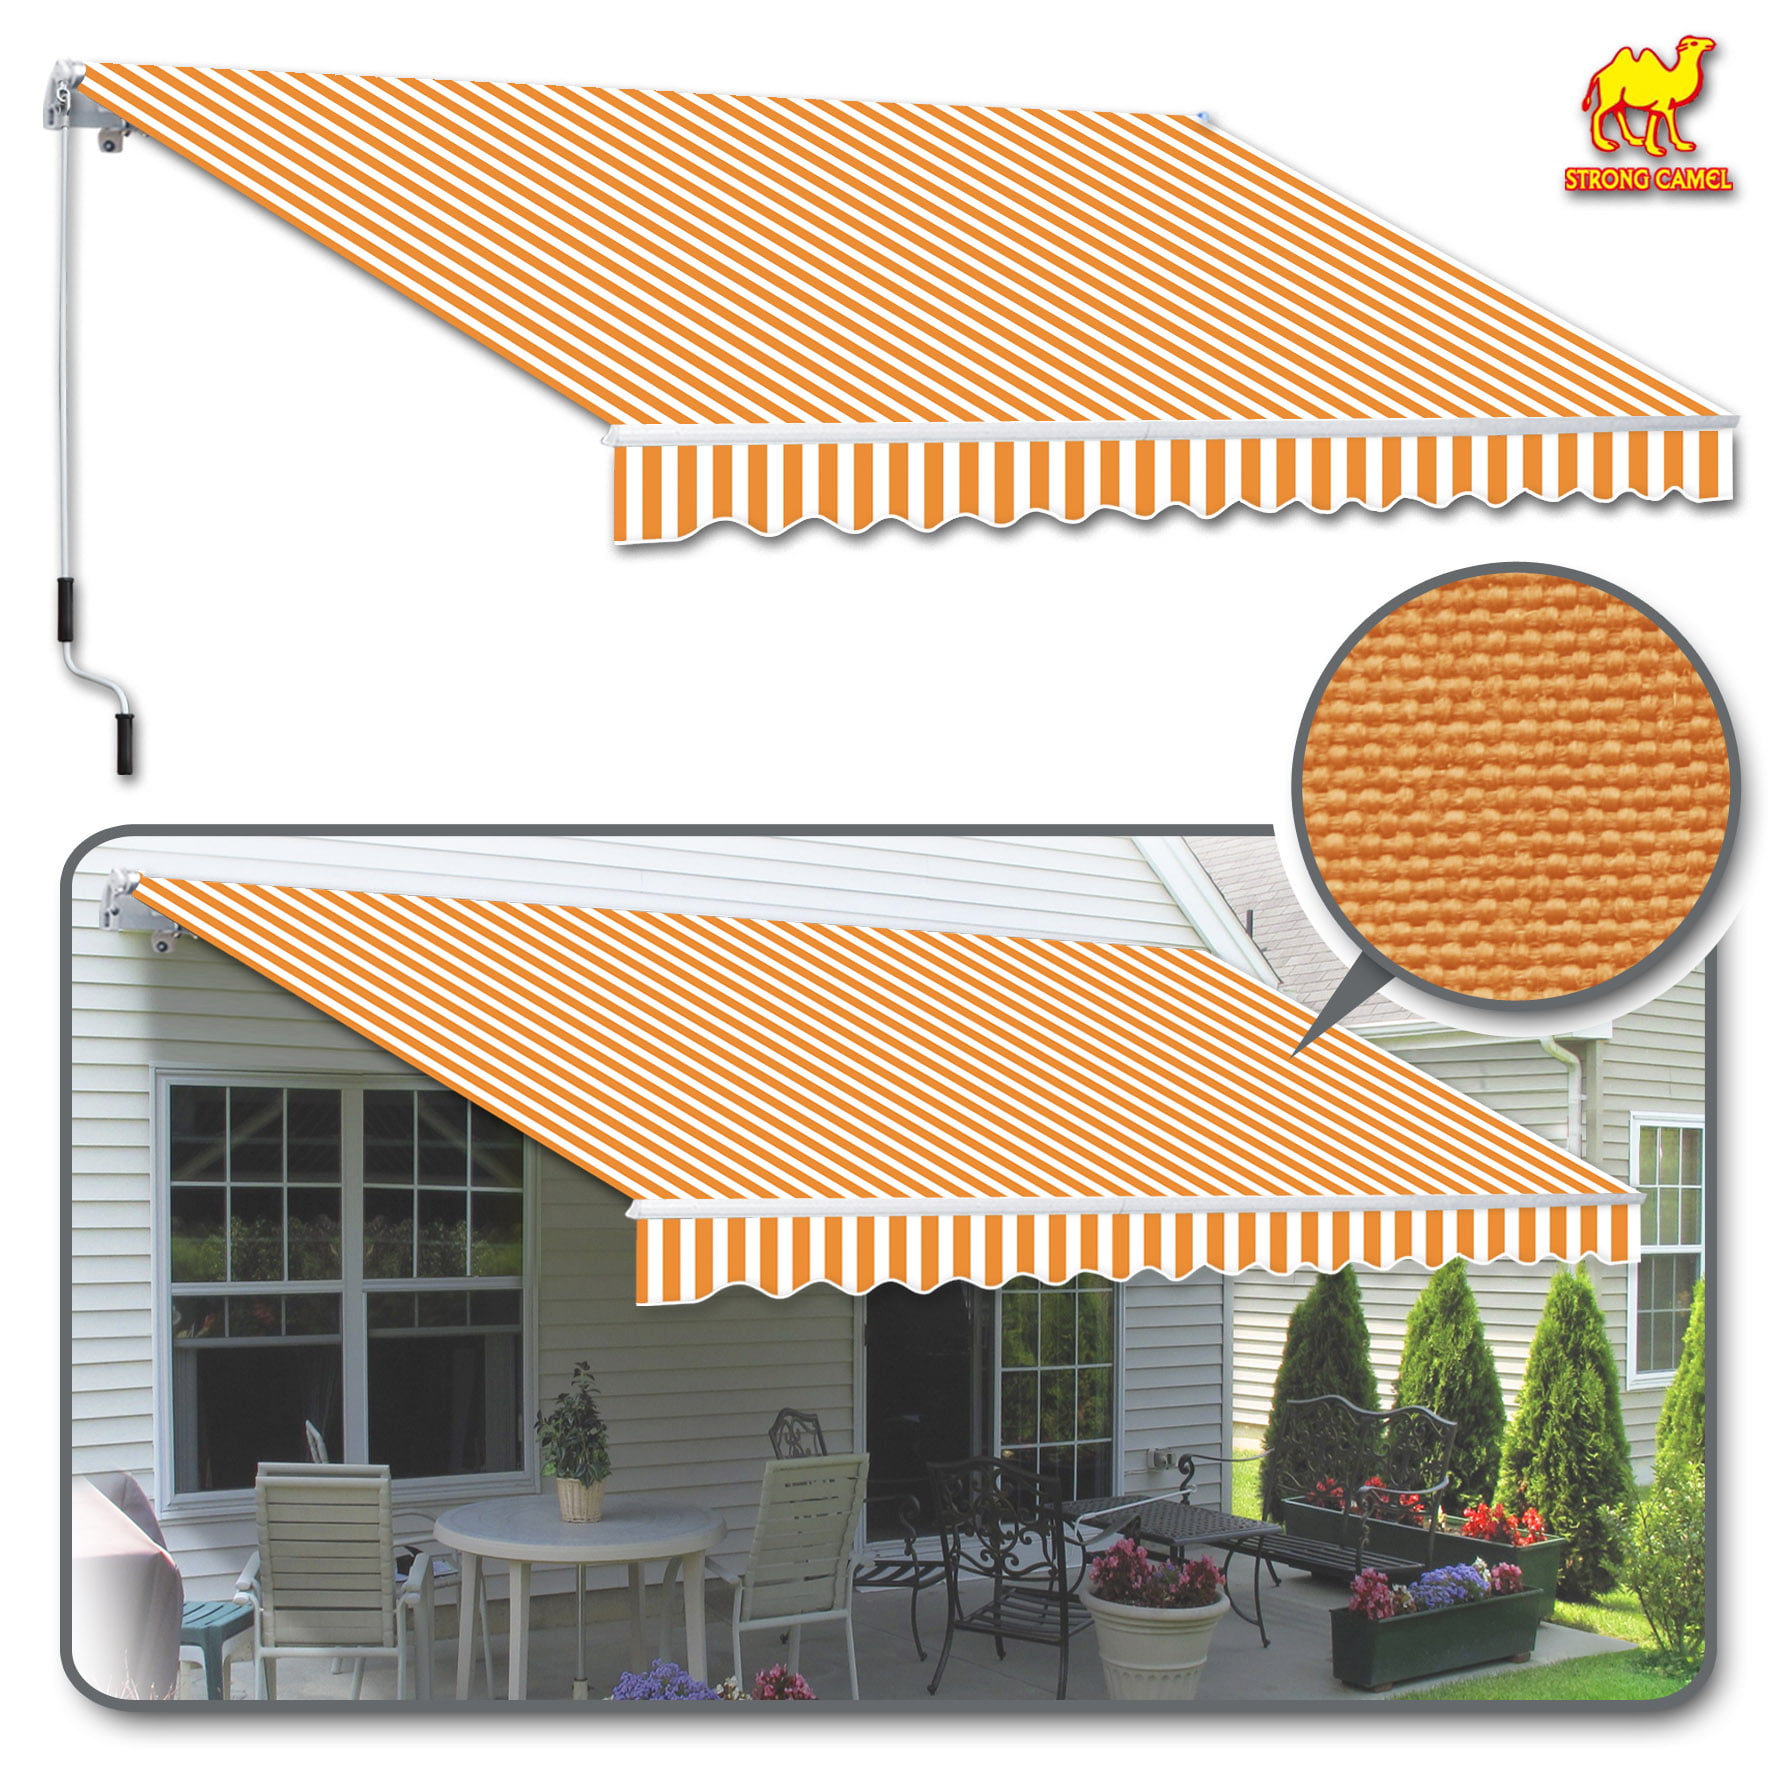 Strong Camel 12' x 8' Manual Yard Retractable Patio Deck Awning Cover, Canopy Sunshade (Yellow